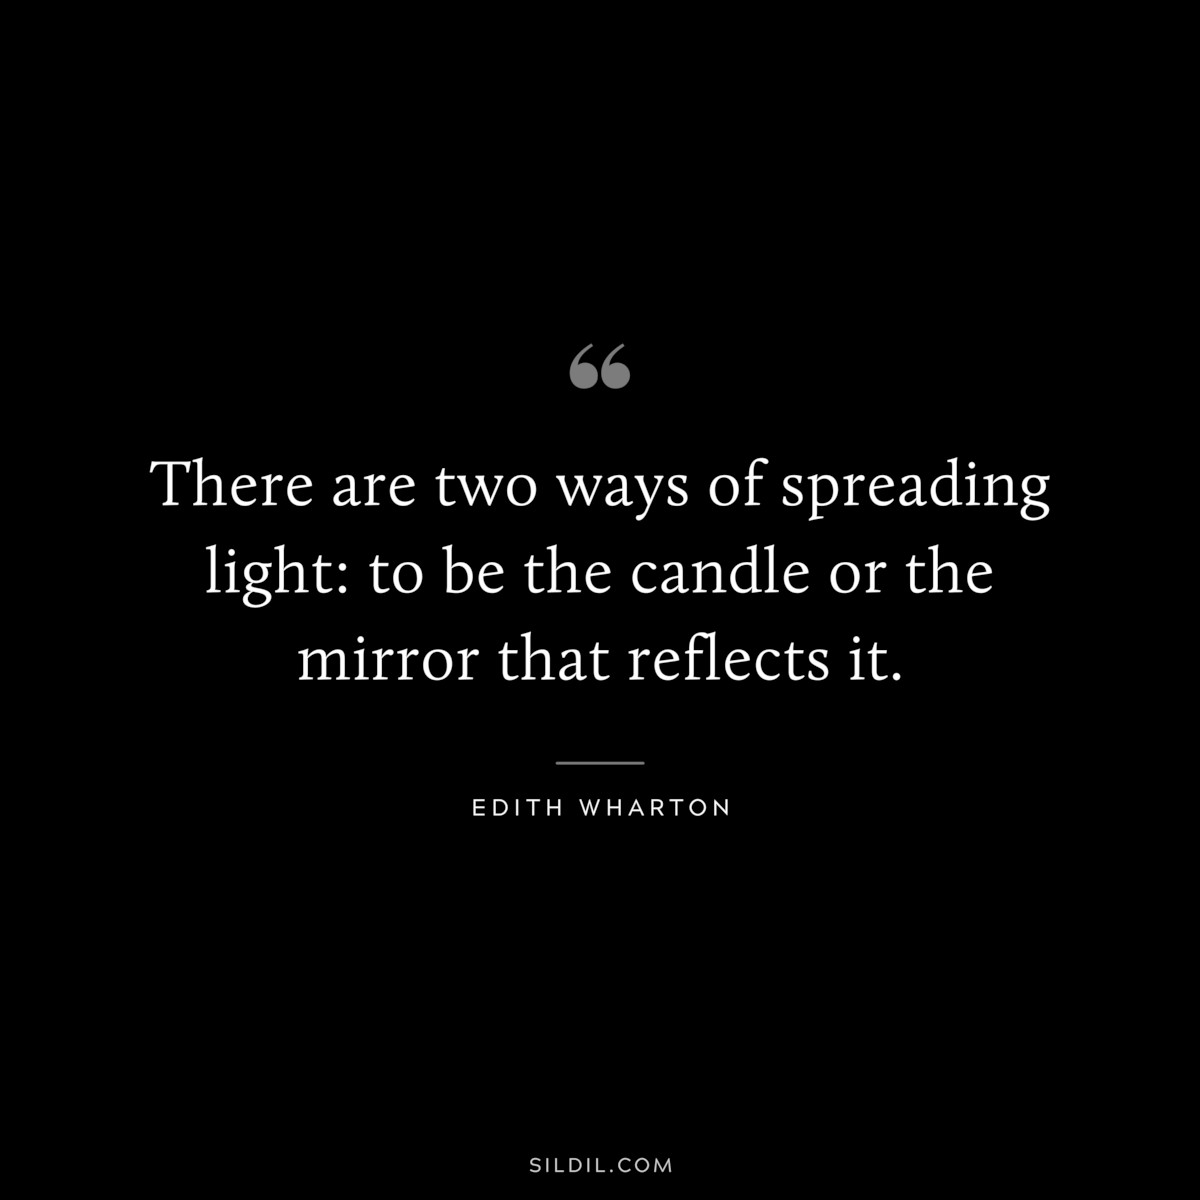 There are two ways of spreading light: to be the candle or the mirror that reflects it. ― Edith Wharton